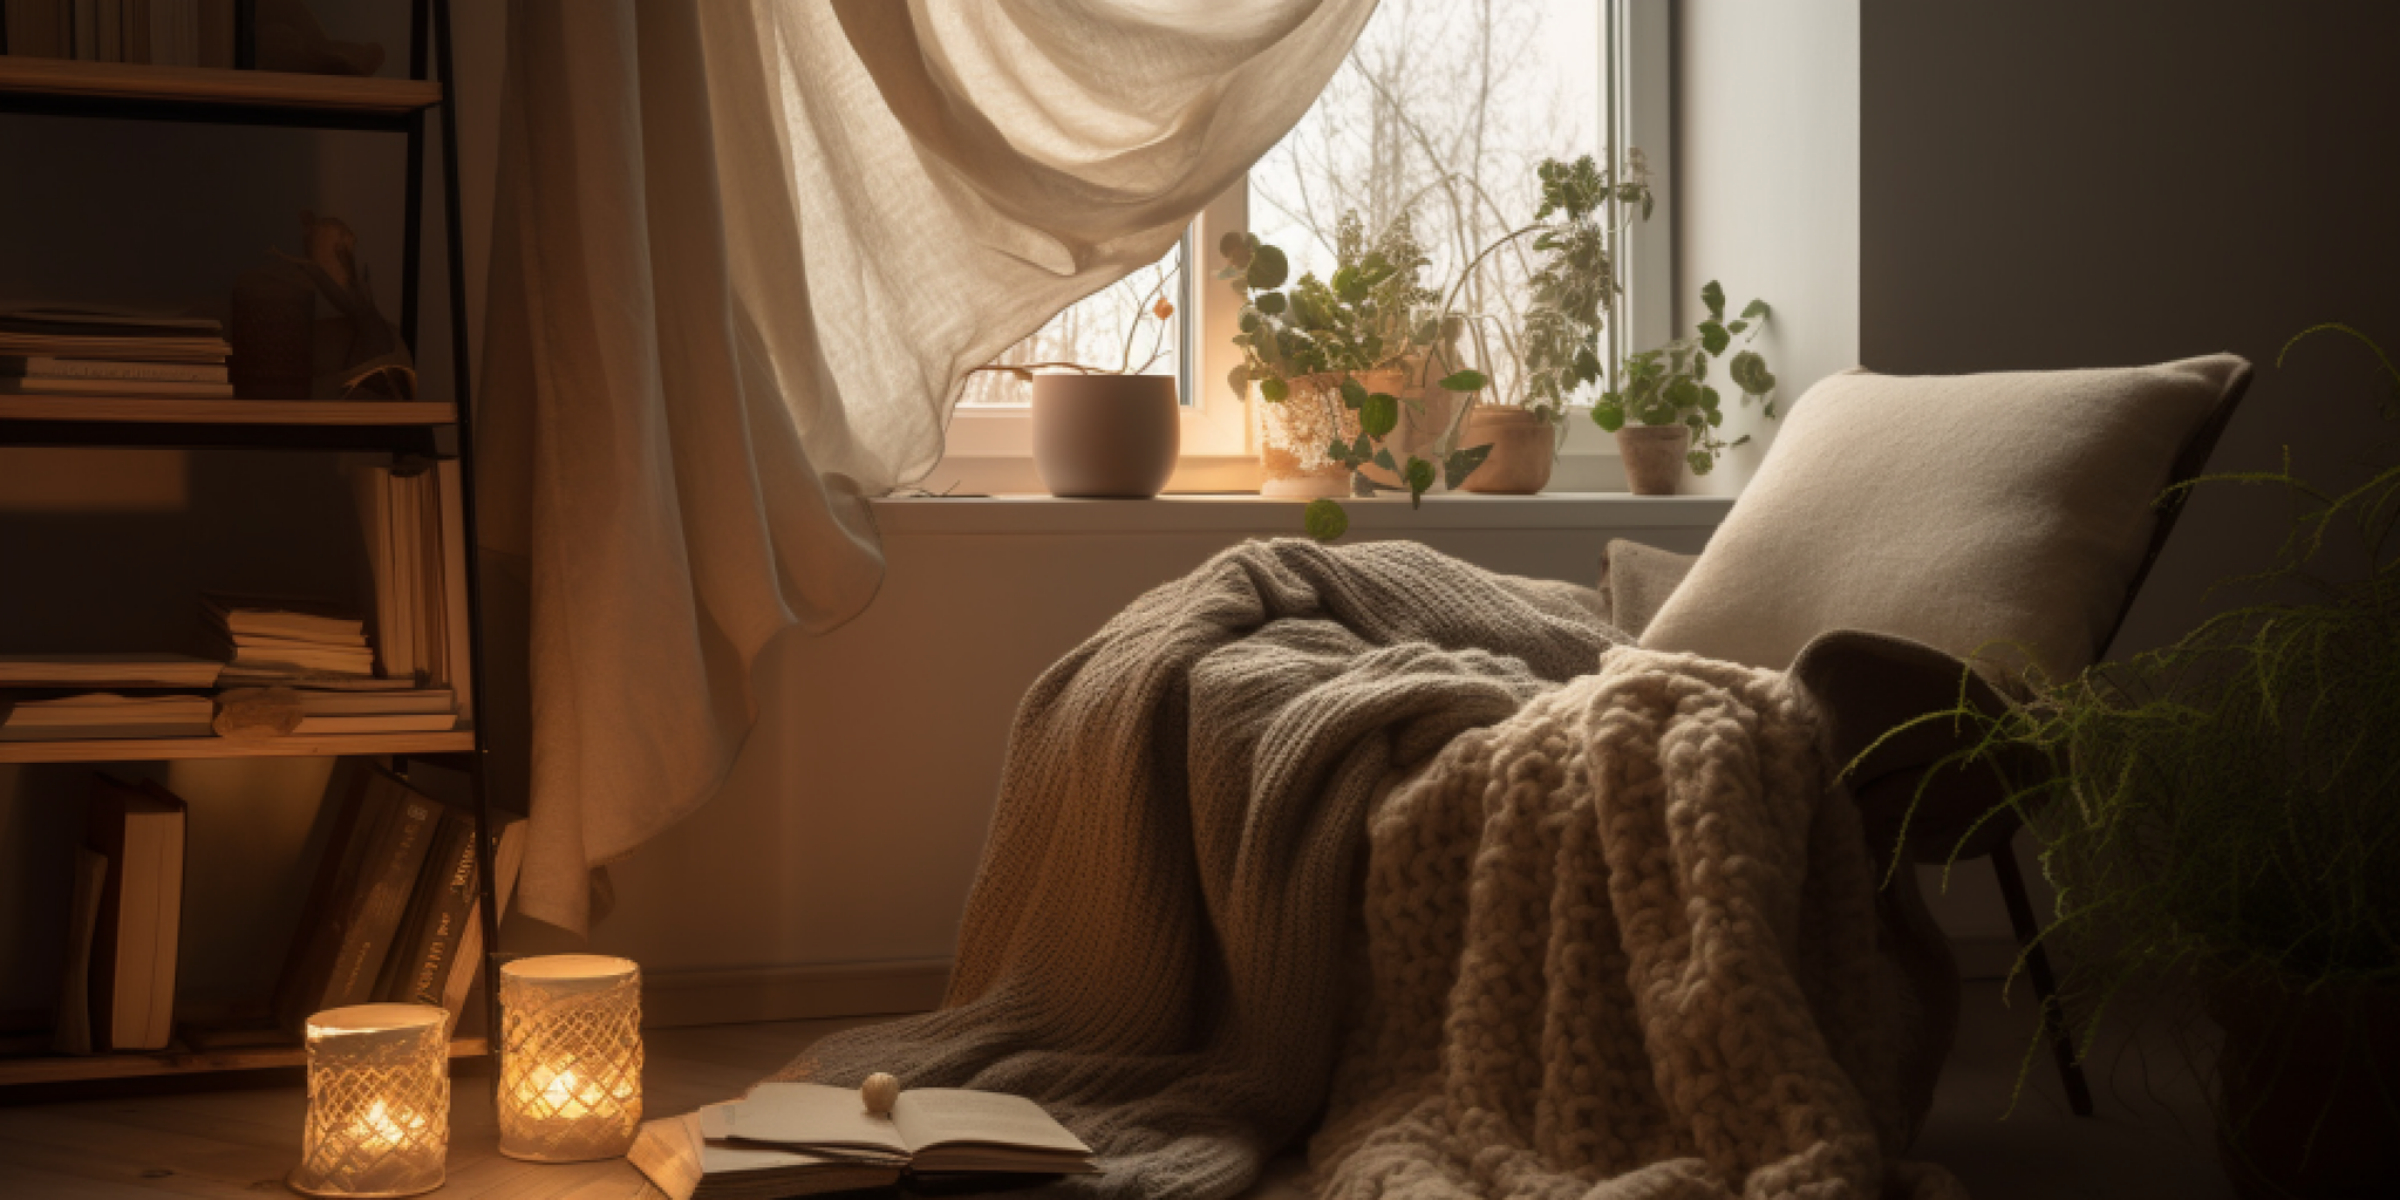 How To Create A Calming Environment